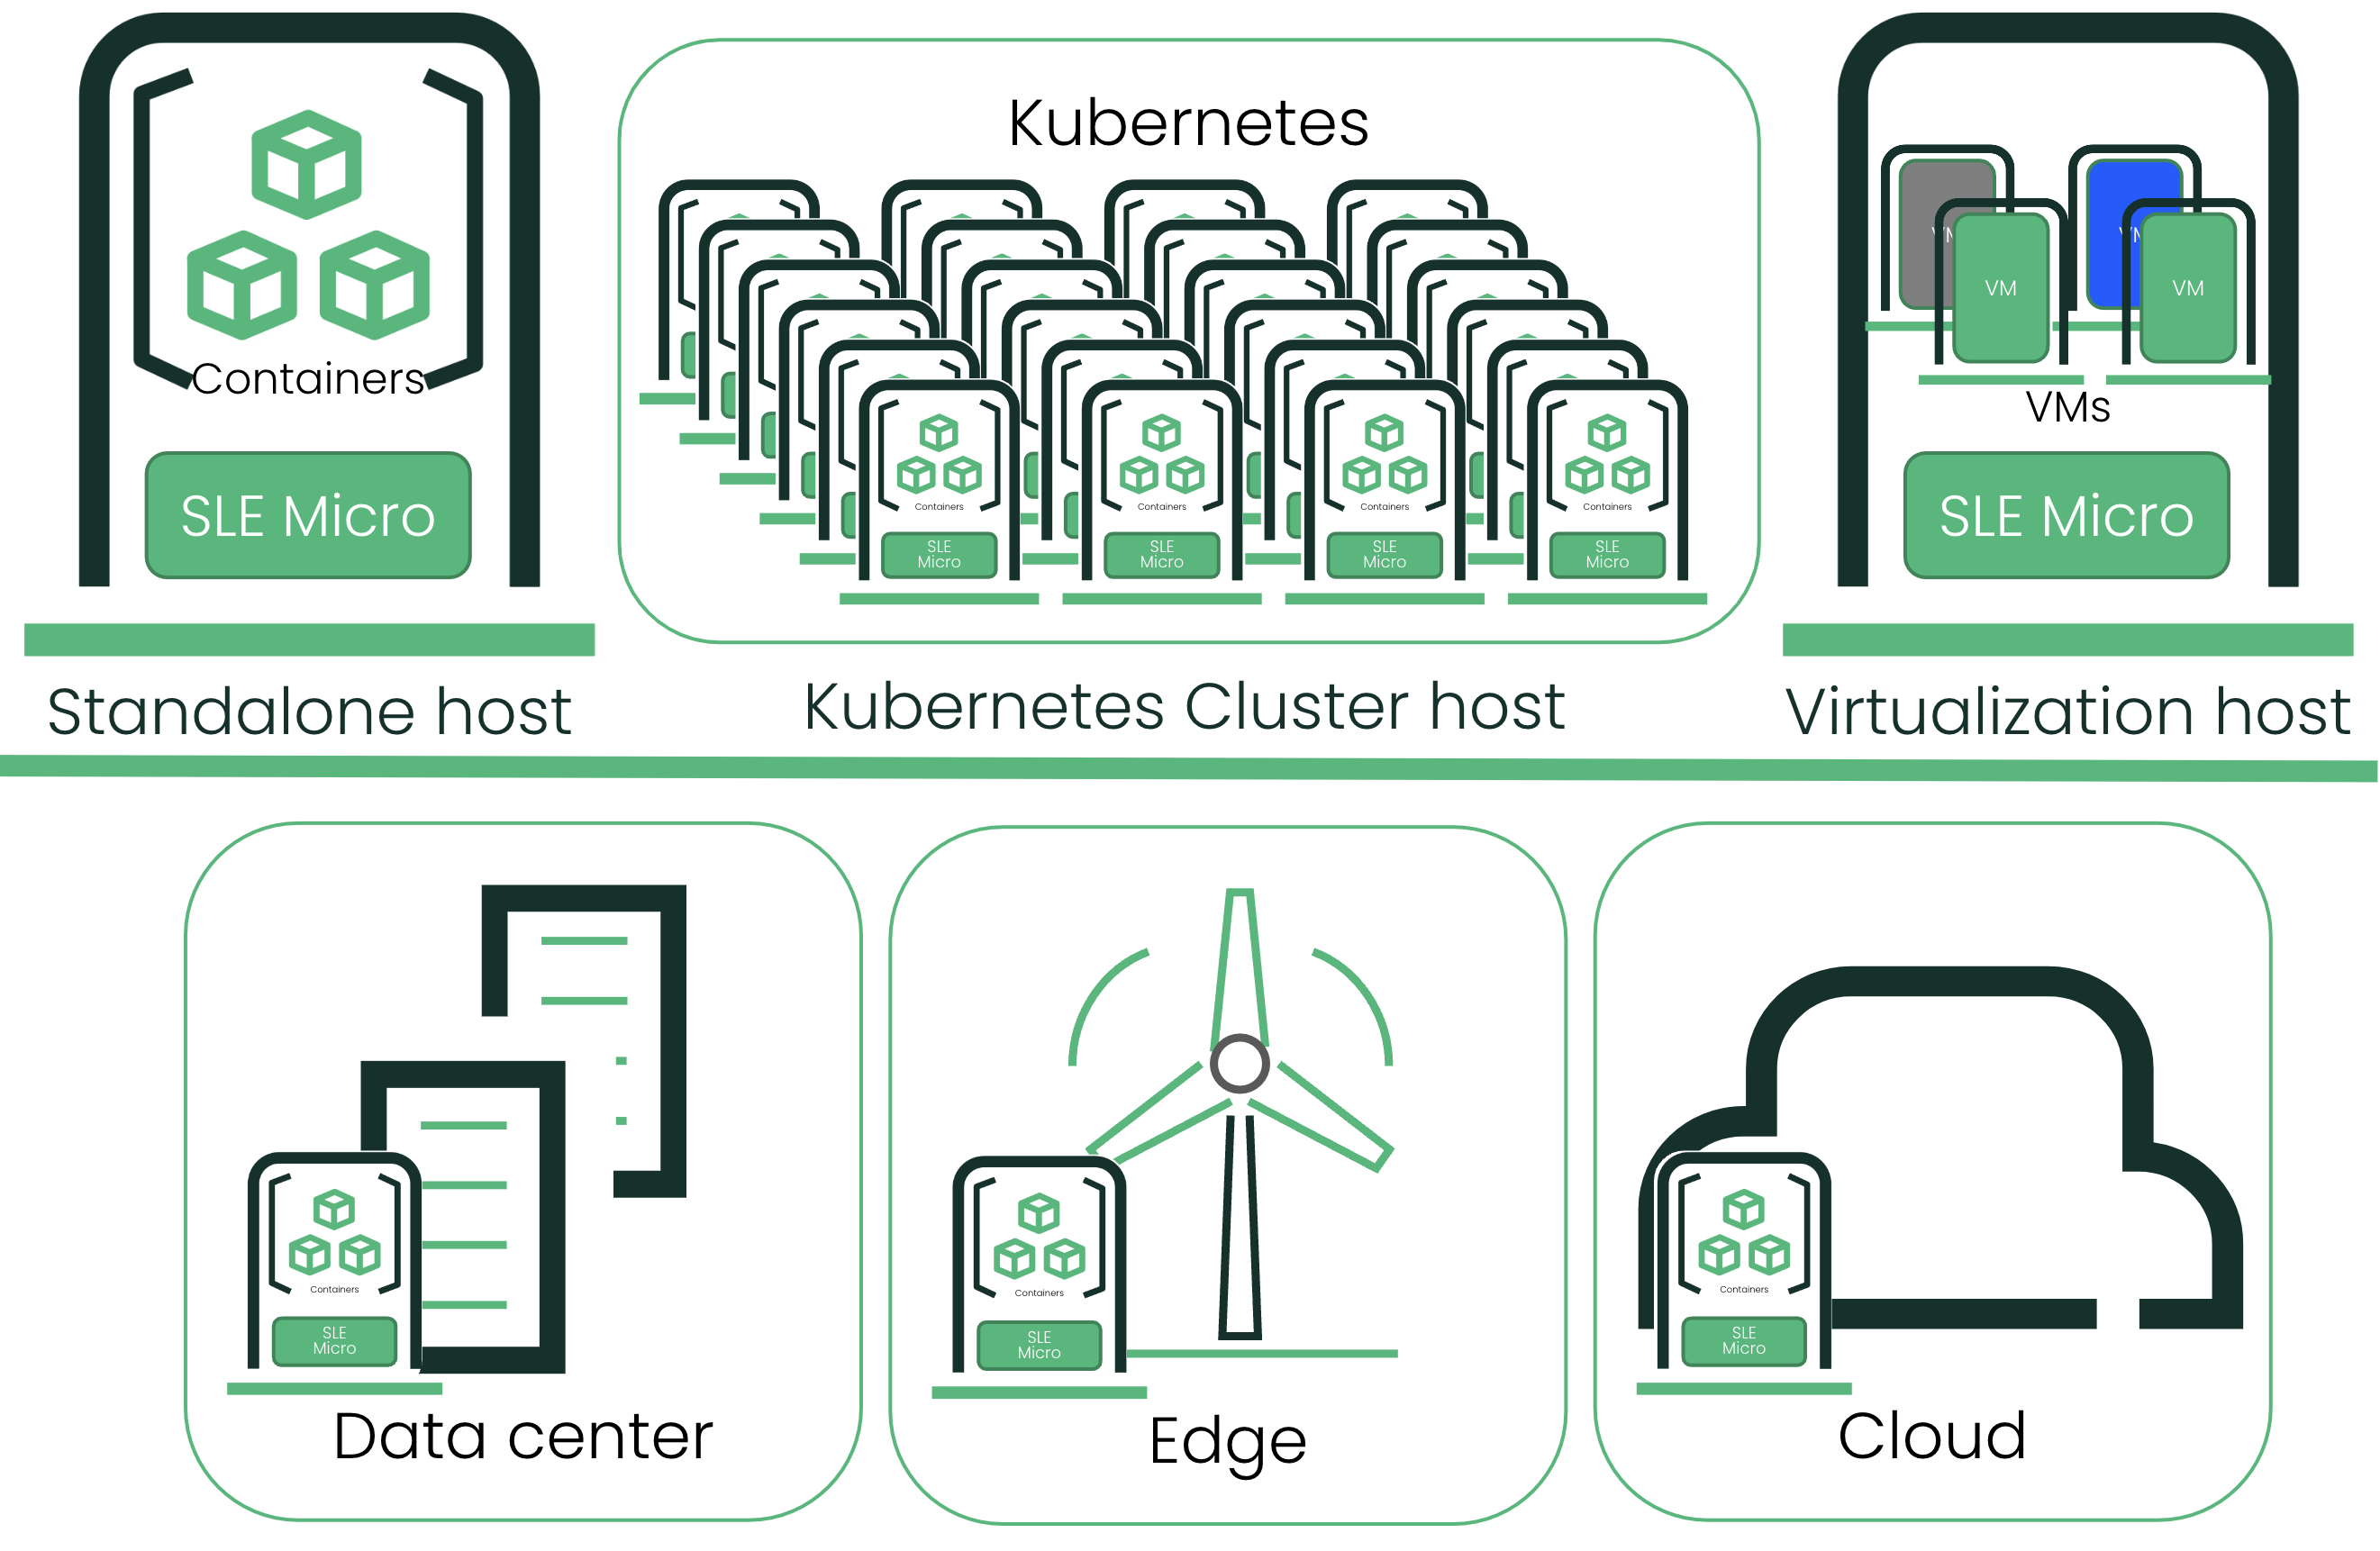 Image shows SUSE Linux Enterprise Micro use cases and scenarios as a standalone container host, as part of a Kubernetes-managed cluster, and as a virtualization host running in the data center, at the Edge, and in the cloud.